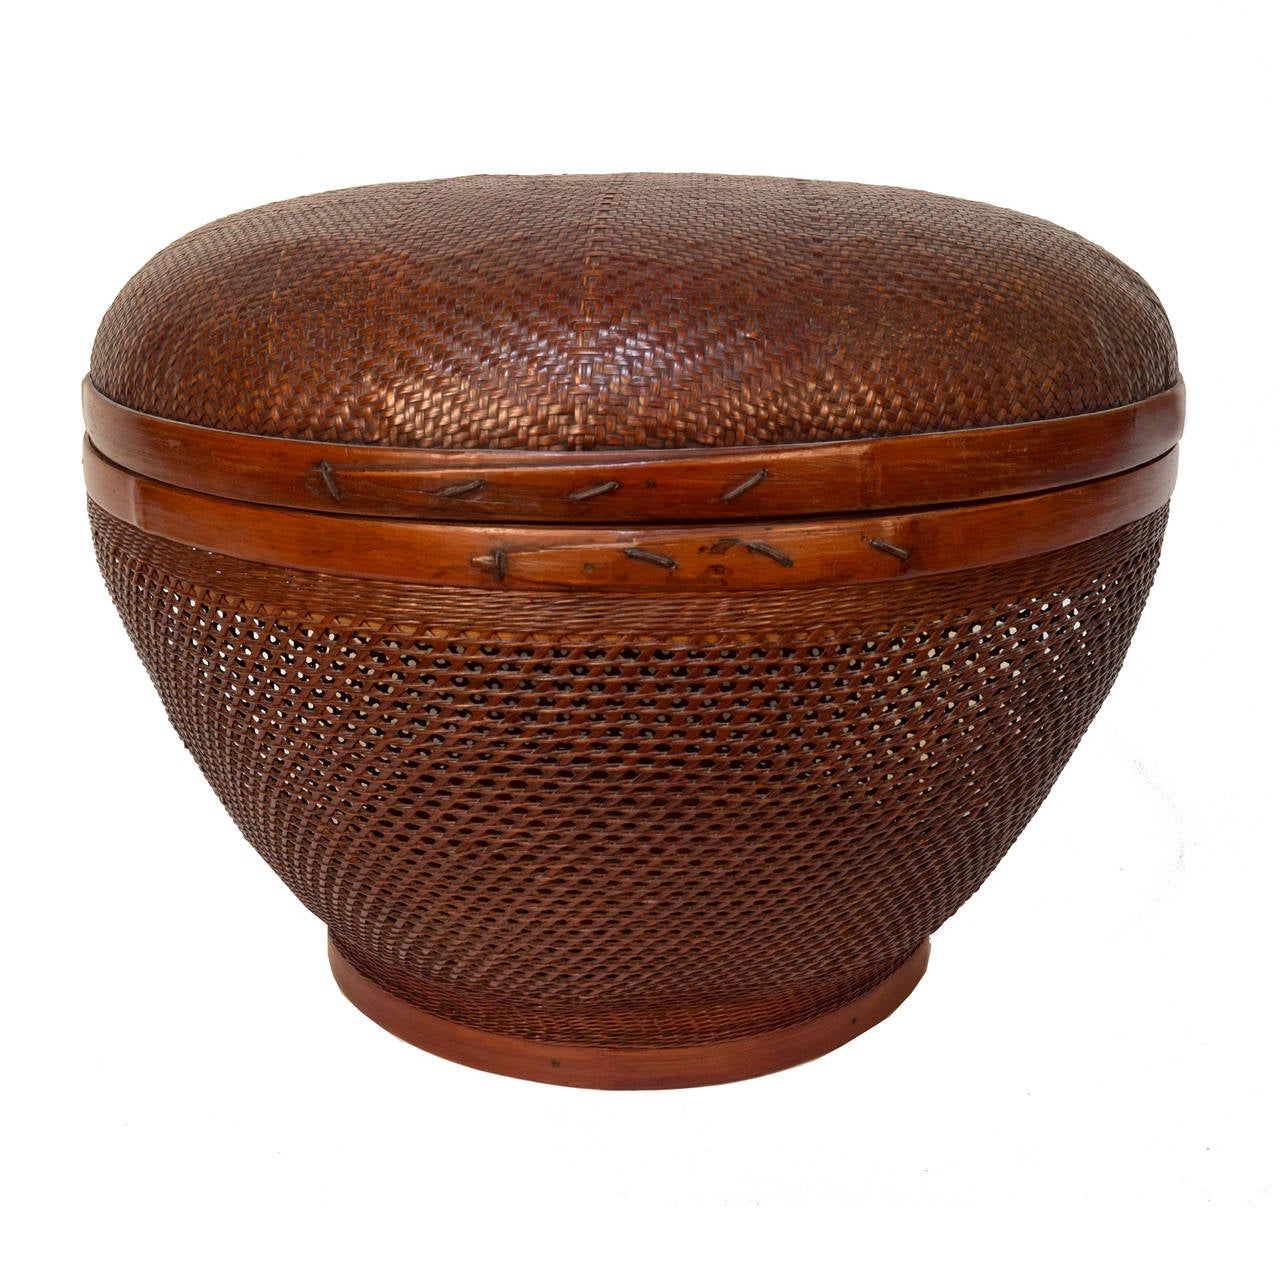 19th Century Chinese Open Weave Covered Basket